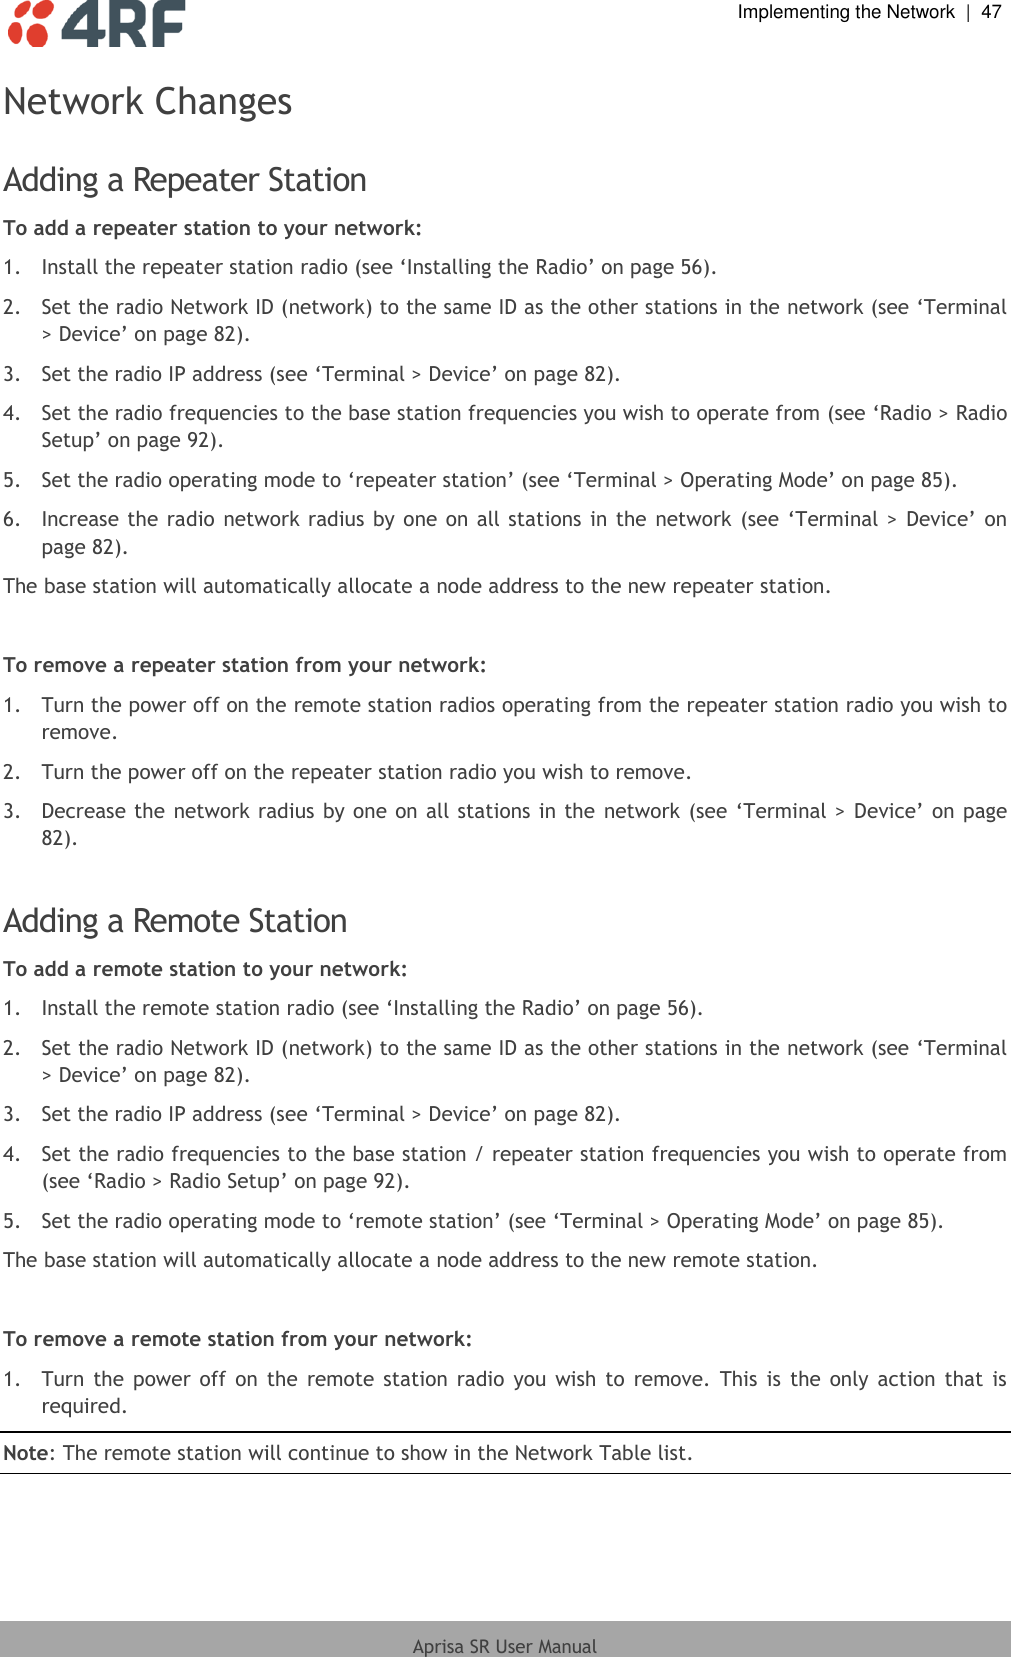  Implementing the Network  |  47  Aprisa SR User Manual  Network Changes  Adding a Repeater Station To add a repeater station to your network: 1.  Install the repeater station radio (see ‘Installing the Radio’ on page 56). 2.  Set the radio Network ID (network) to the same ID as the other stations in the network (see ‘Terminal &gt; Device’ on page 82). 3.  Set the radio IP address (see ‘Terminal &gt; Device’ on page 82). 4.  Set the radio frequencies to the base station frequencies you wish to operate from (see ‘Radio &gt; Radio Setup’ on page 92). 5.  Set the radio operating mode to ‘repeater station’ (see ‘Terminal &gt; Operating Mode’ on page 85). 6.  Increase the radio  network radius  by one on all stations in the  network (see ‘Terminal &gt; Device’ on page 82). The base station will automatically allocate a node address to the new repeater station.  To remove a repeater station from your network: 1.  Turn the power off on the remote station radios operating from the repeater station radio you wish to remove. 2.  Turn the power off on the repeater station radio you wish to remove. 3.  Decrease the network radius by one on all stations in the network (see ‘Terminal &gt; Device’ on page 82).  Adding a Remote Station To add a remote station to your network: 1.  Install the remote station radio (see ‘Installing the Radio’ on page 56). 2.  Set the radio Network ID (network) to the same ID as the other stations in the network (see ‘Terminal &gt; Device’ on page 82). 3.  Set the radio IP address (see ‘Terminal &gt; Device’ on page 82). 4.  Set the radio frequencies to the base station / repeater station frequencies you wish to operate from (see ‘Radio &gt; Radio Setup’ on page 92). 5.  Set the radio operating mode to ‘remote station’ (see ‘Terminal &gt; Operating Mode’ on page 85). The base station will automatically allocate a node address to the new remote station.  To remove a remote station from your network: 1.  Turn  the  power  off  on  the  remote  station  radio  you  wish  to  remove.  This  is  the  only  action  that  is required. Note: The remote station will continue to show in the Network Table list.  